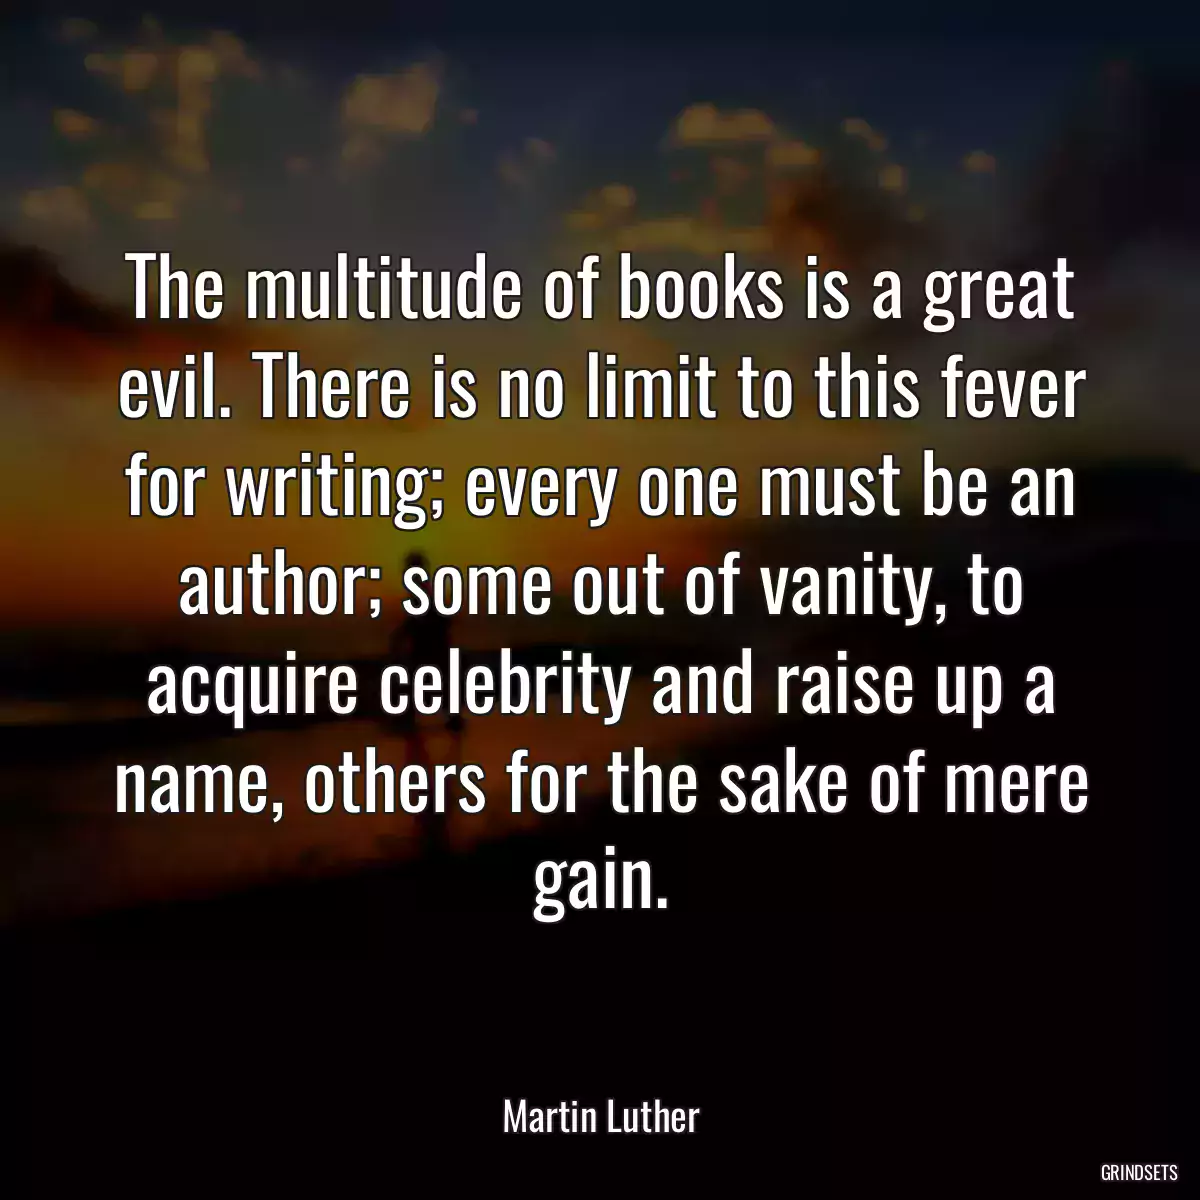 The multitude of books is a great evil. There is no limit to this fever for writing; every one must be an author; some out of vanity, to acquire celebrity and raise up a name, others for the sake of mere gain.